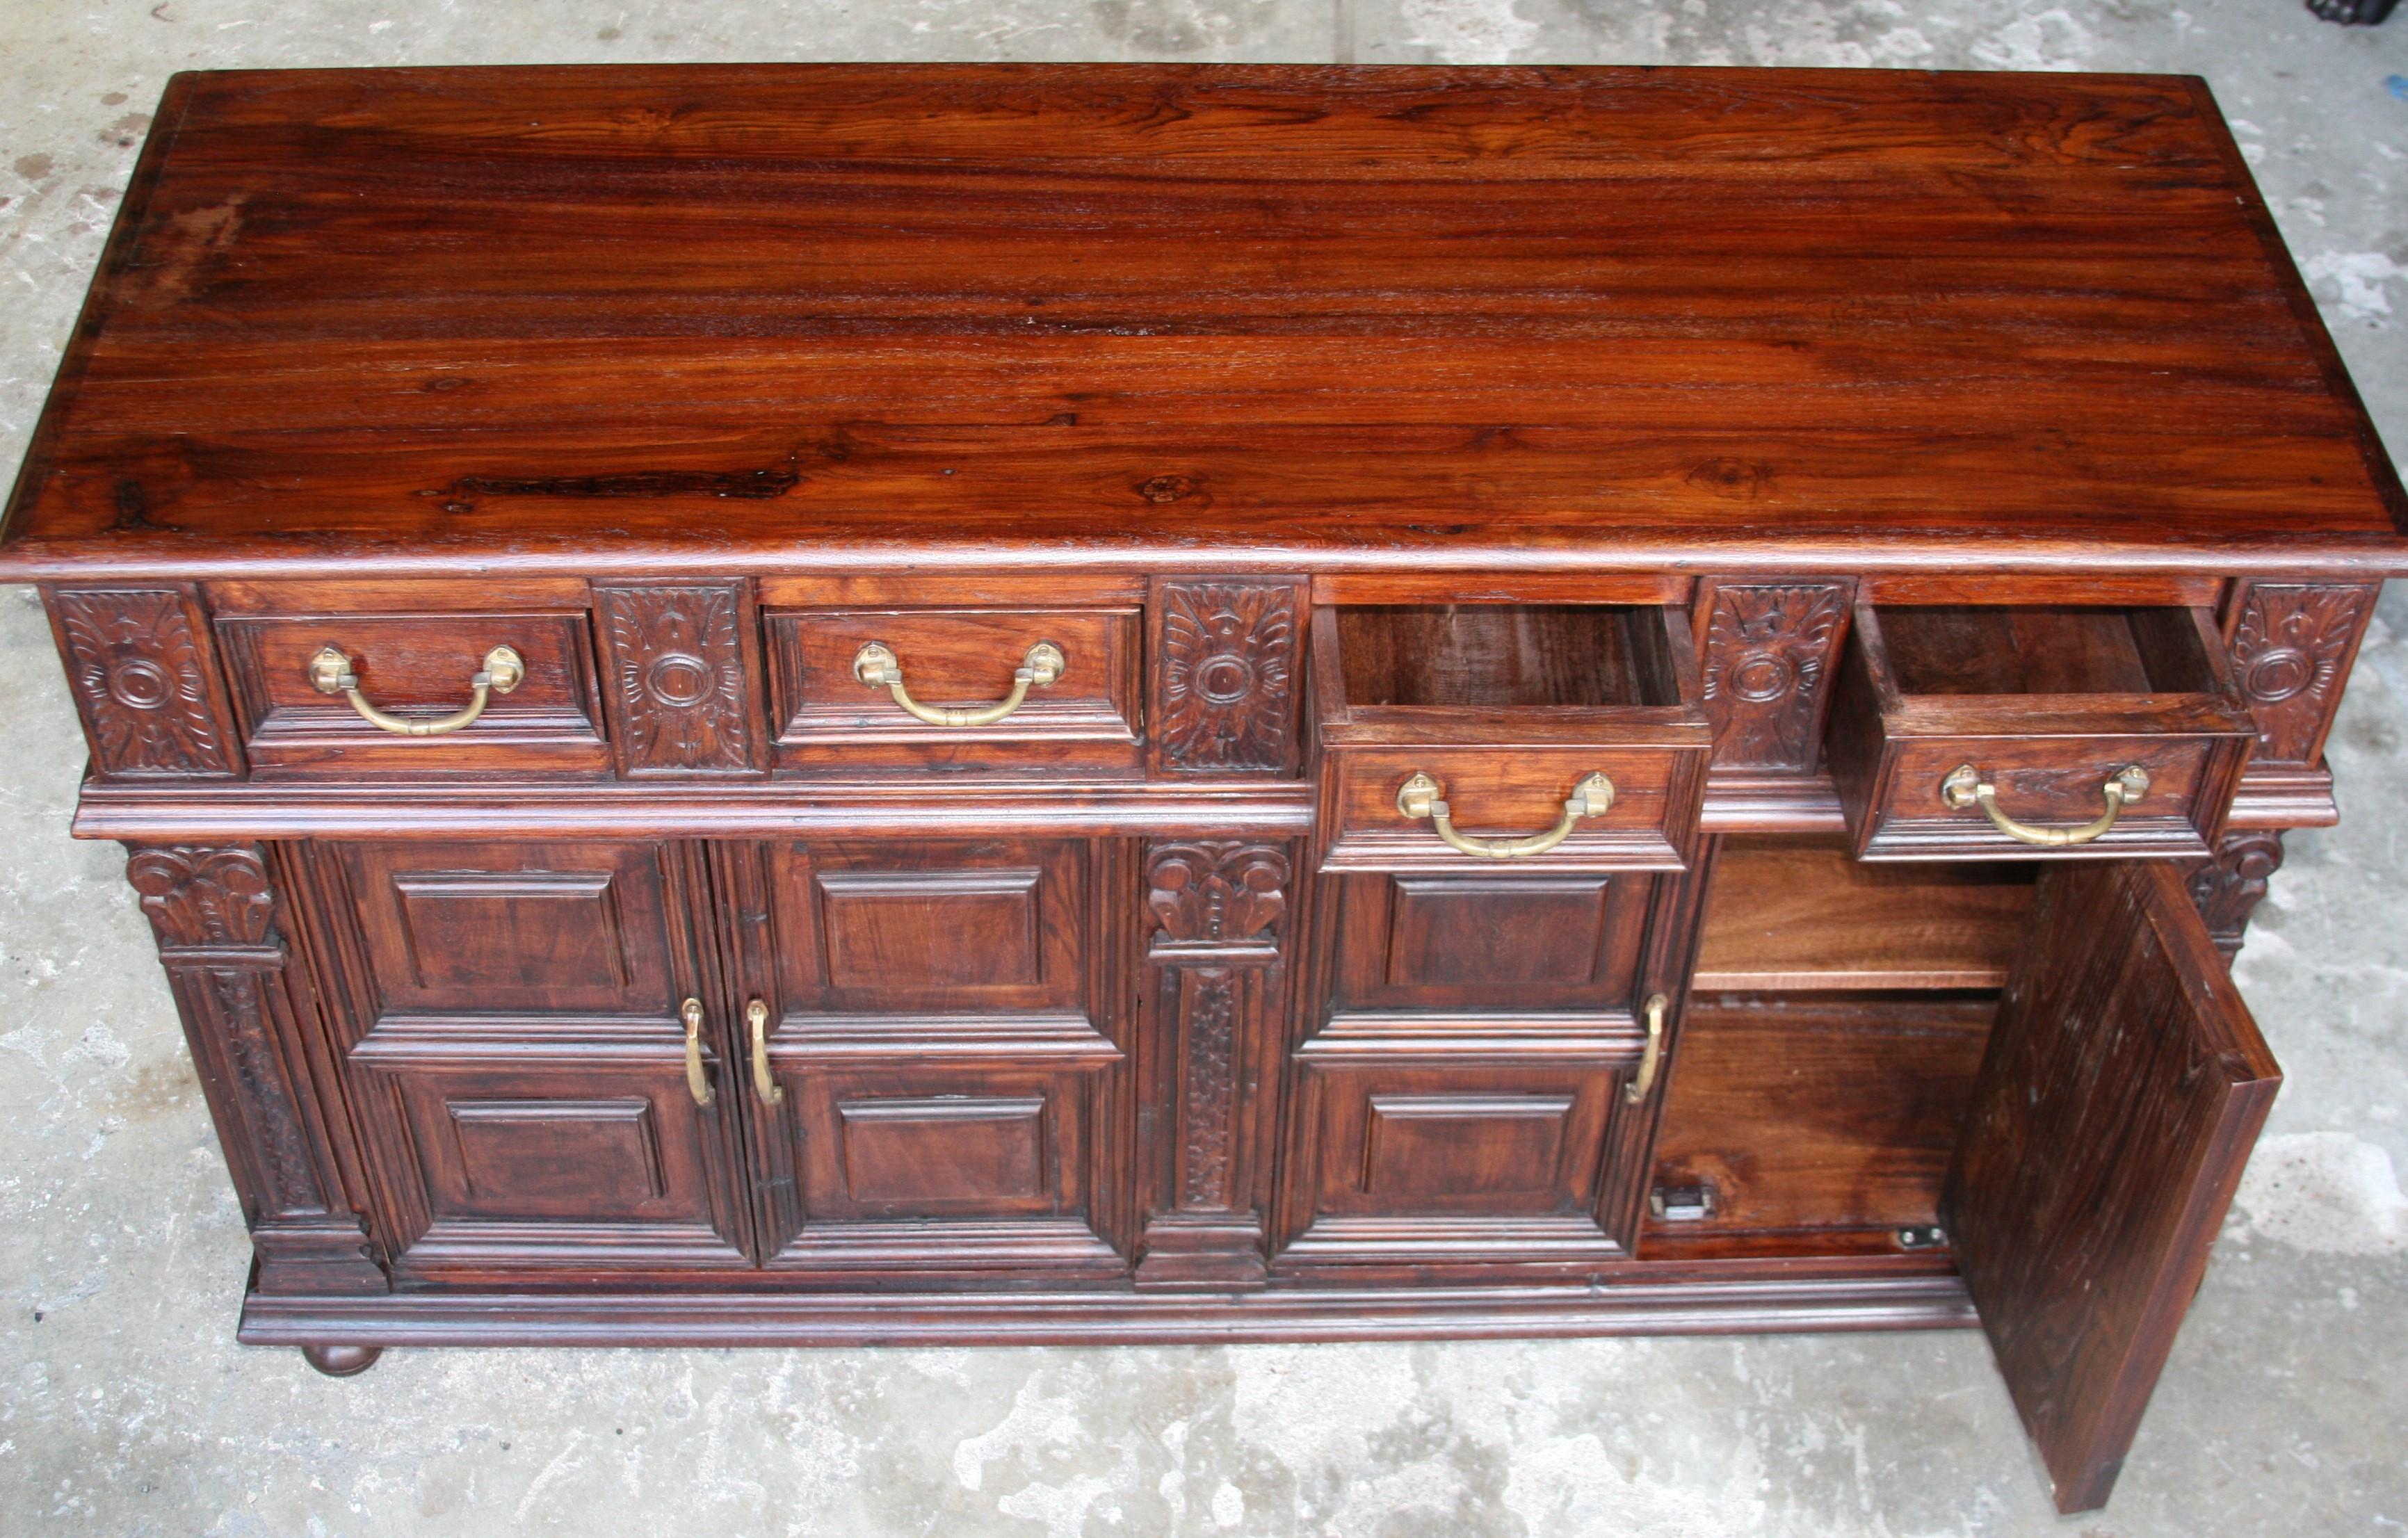 Solid Teak Wood Early 20th Century Superbly Crafted French Colonial Credenza For Sale 4